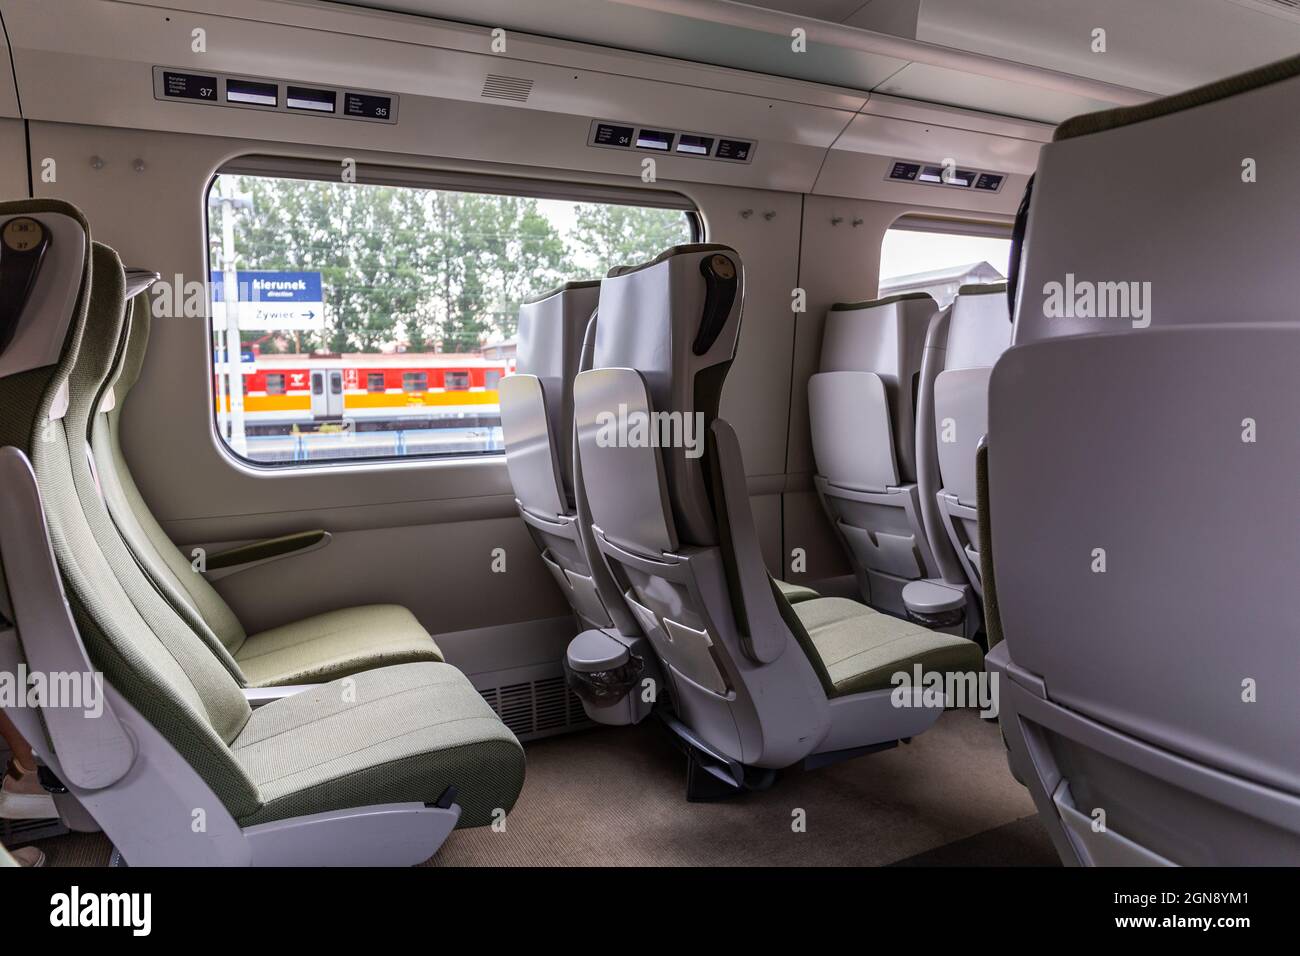 Bielsko Biala, Poland, 09.07.2021. PKP Express InterCity train, railway wagon without compartments inside view with modern seats before departure. Stock Photo